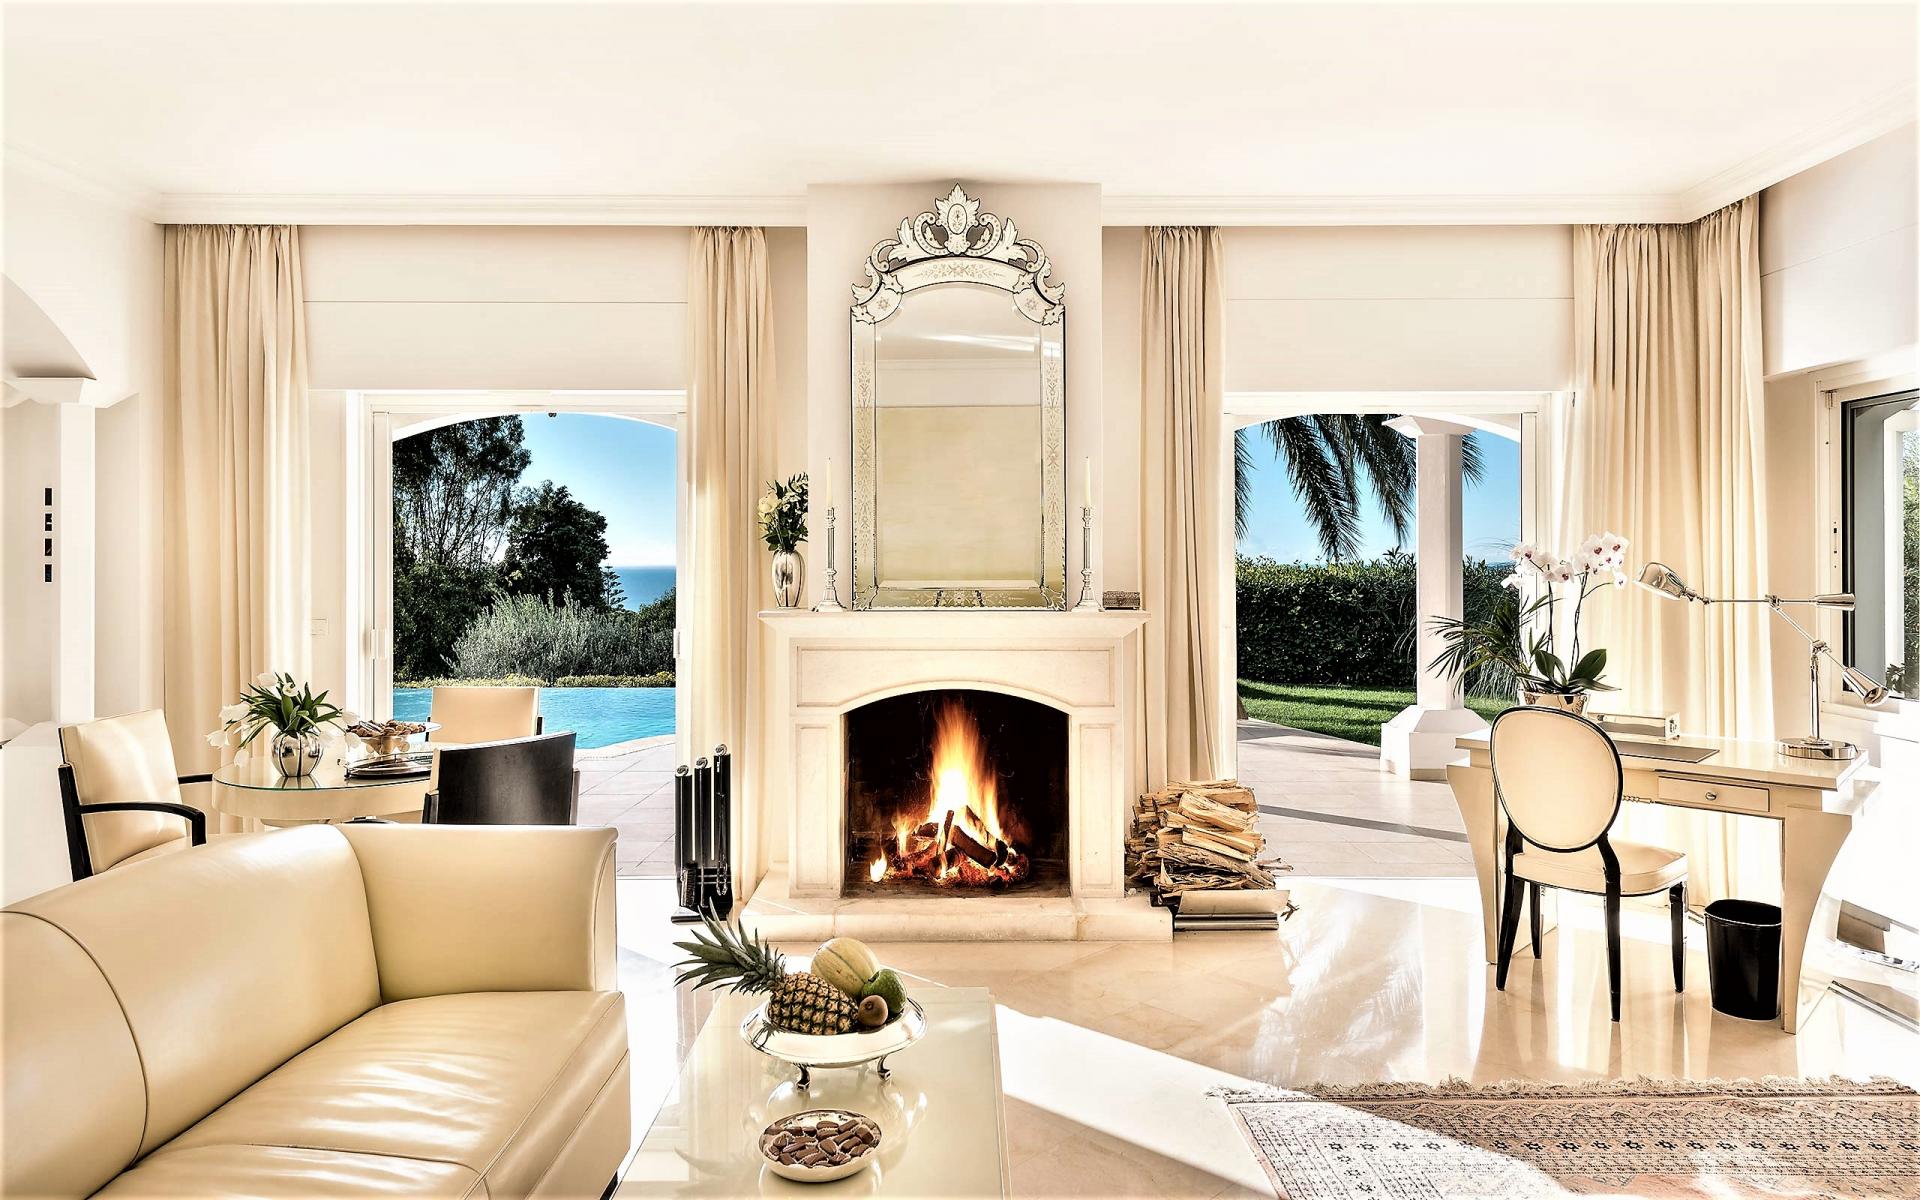 THE LIVING ROOM AND ITS FIREPLACE IN VILLA ROSE